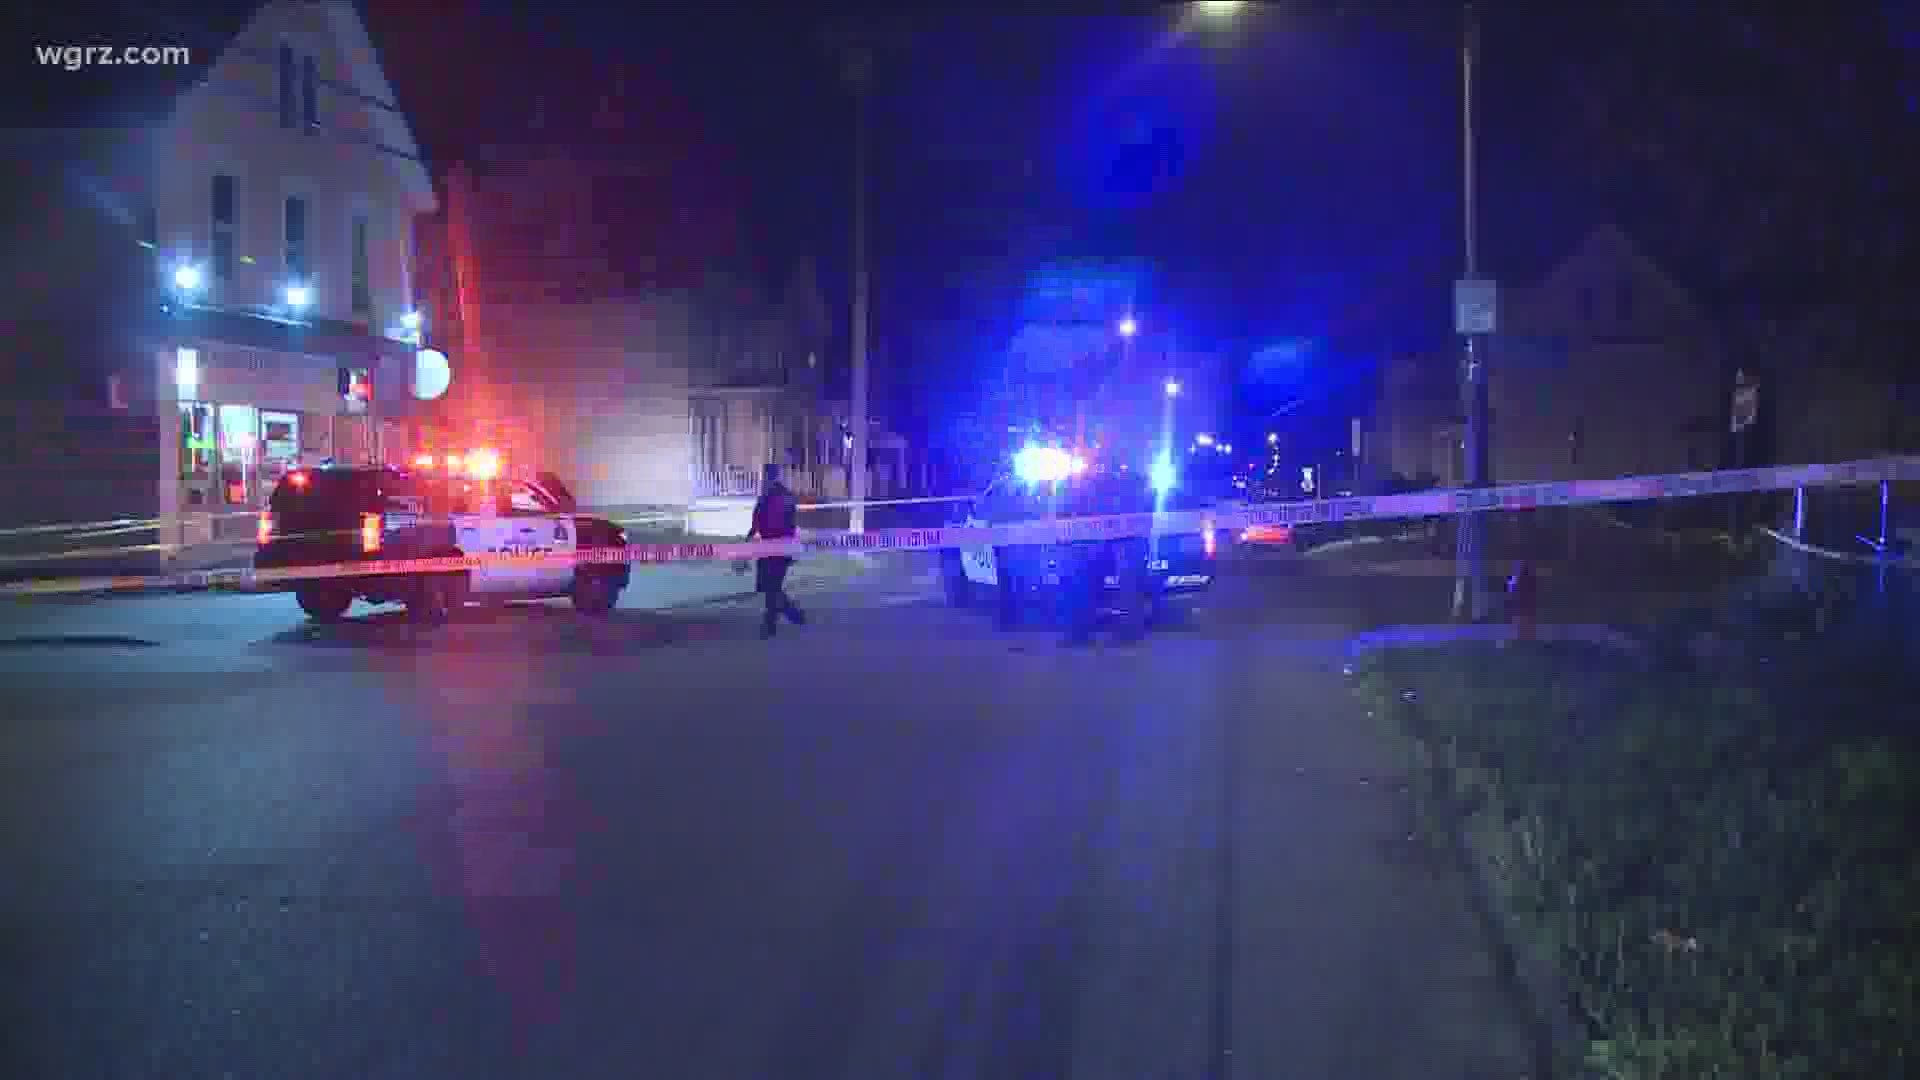 buffalo police say the 50-year-old man who was hit AT THE CORNER OF PLYMOUTH AND HAMPSHIRE - has now died.